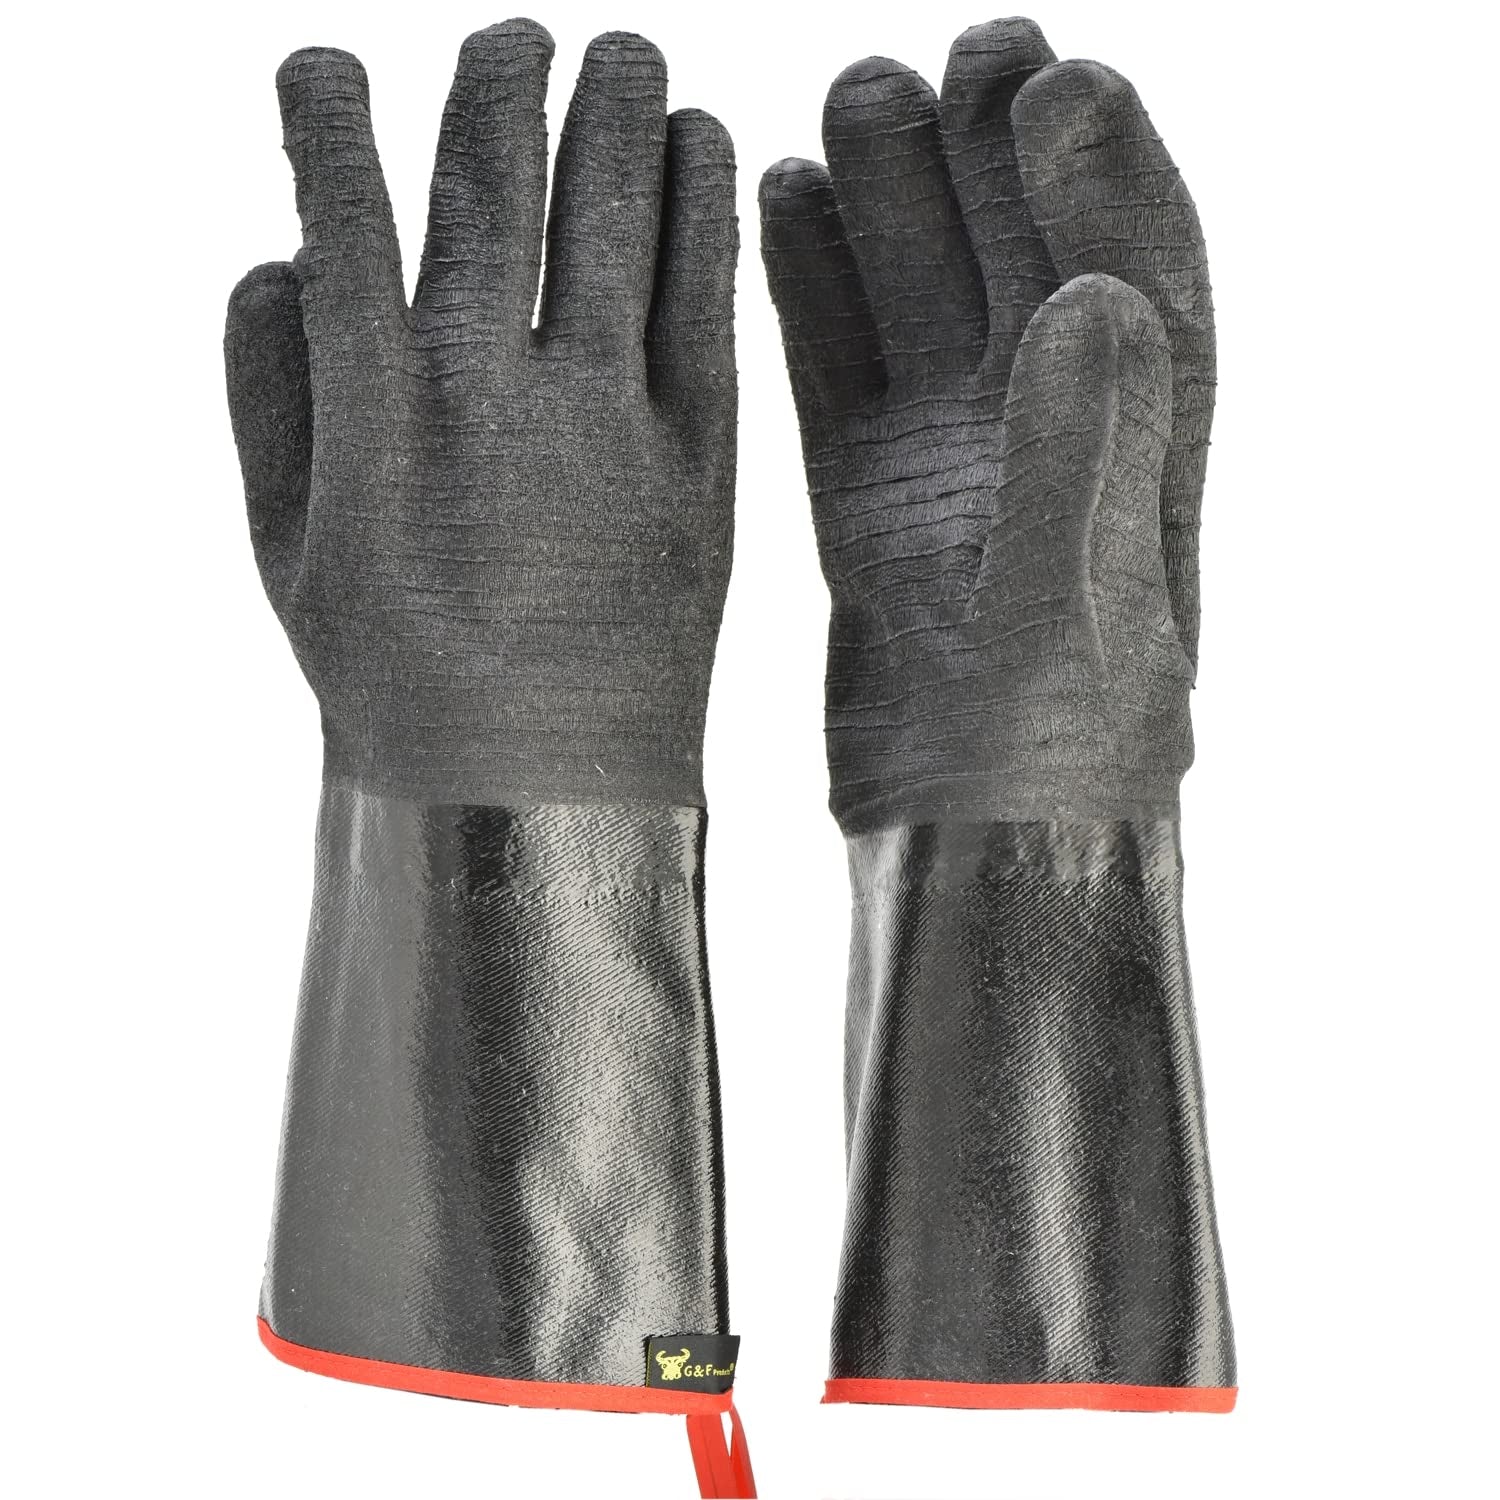 G & F Products, G & F Products 8119-13Inch Cooking Gloves Food Safe No BPA Insulated Waterproof, Oil Proof Heat Resistant BBQ, Smoker, Grill, and Outdoor Neoprene Material, 13 Inch Long, Black